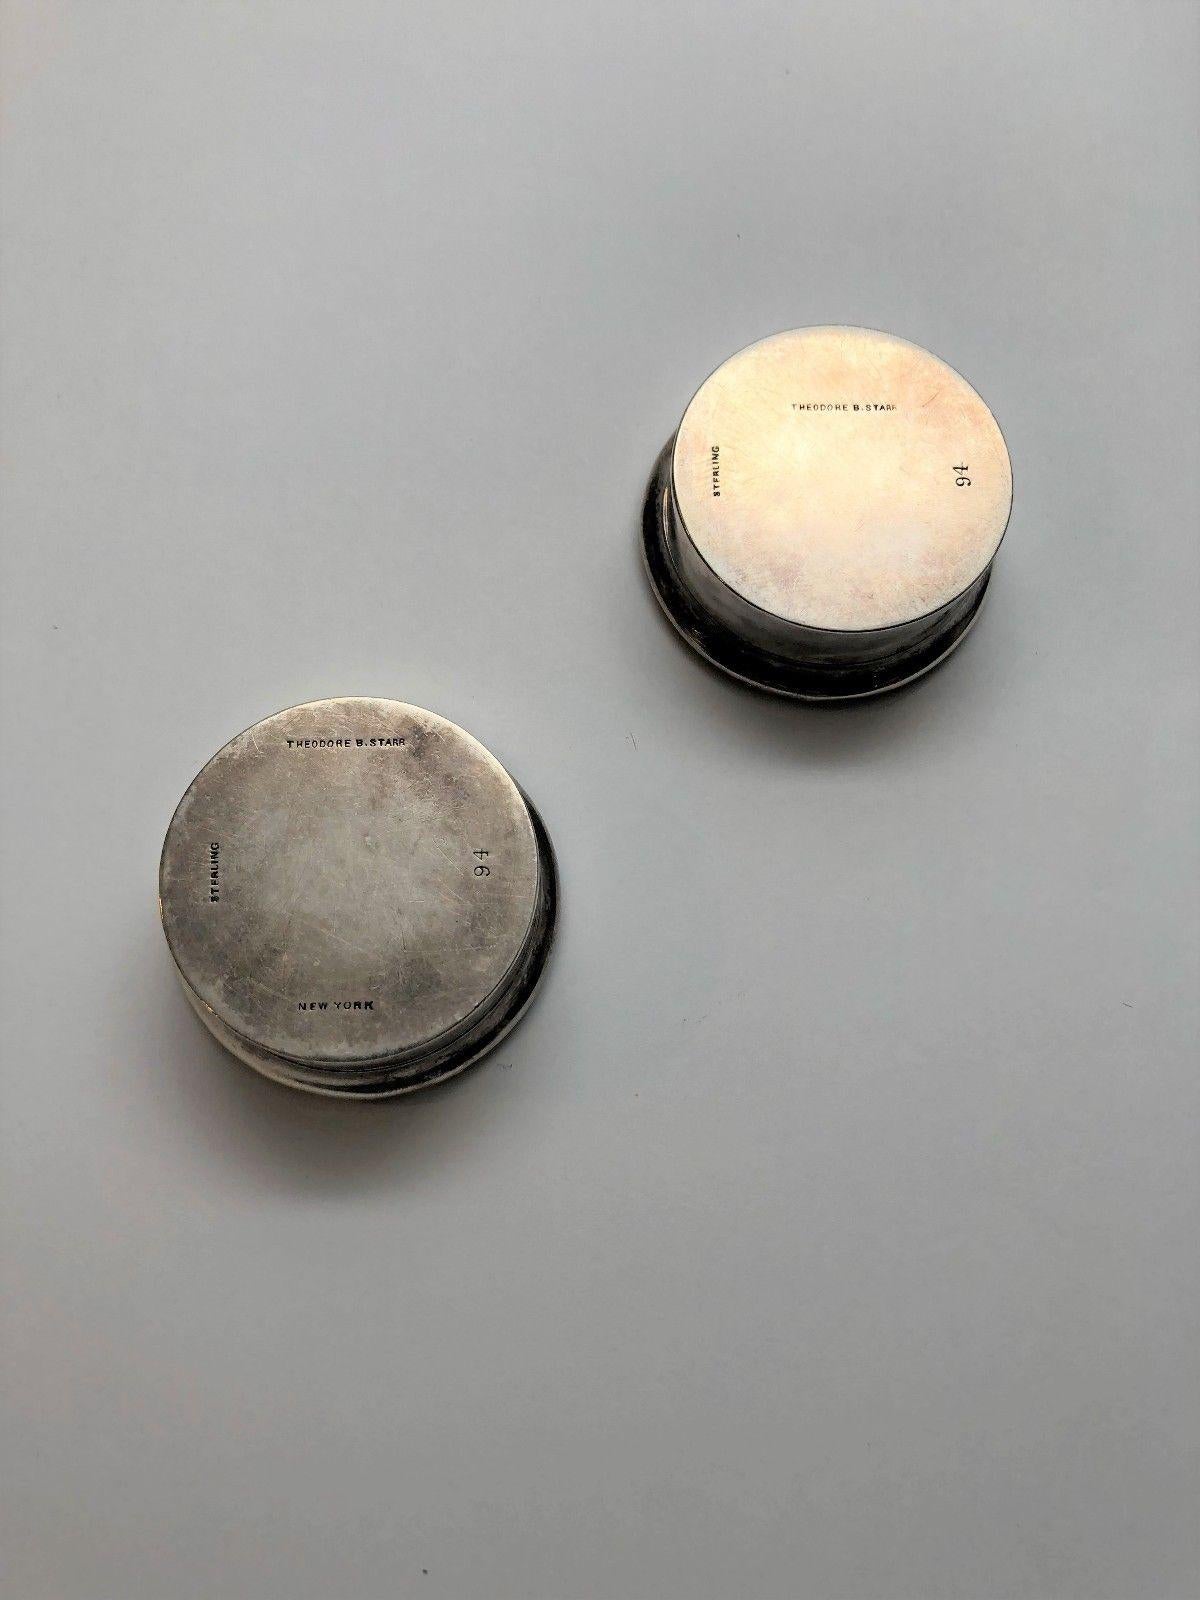 Set of 2 sterling silver repoussé round pill box by Theodore B Starr. Starr was in business from 1862-1923. Monogrammed MEH. Marked: STERLING THEODORE B STARR NEW YORK (on one box) 94. Measures: lid is approx 1 7/8